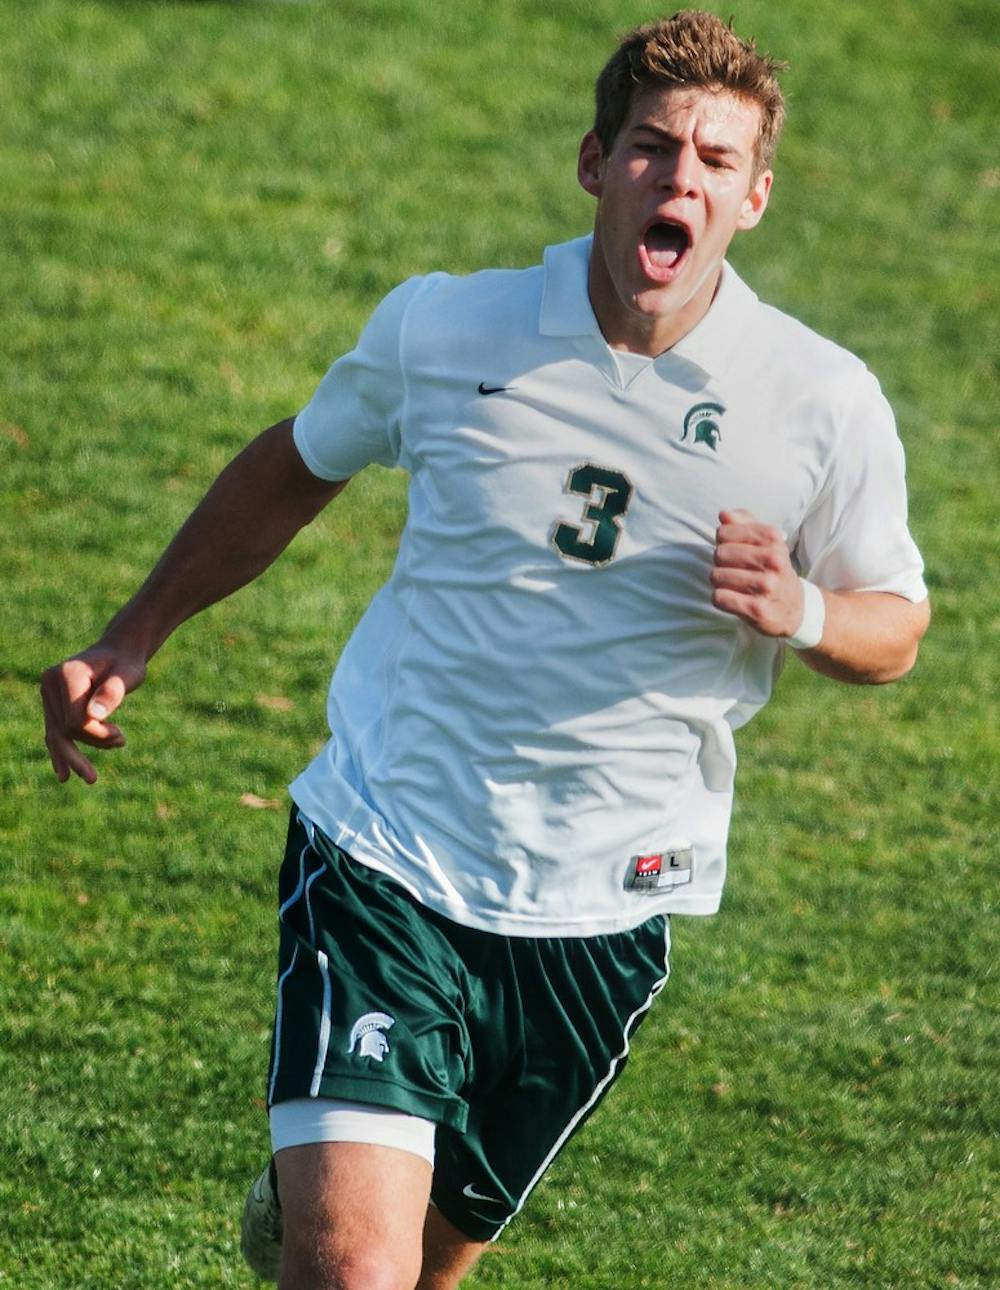 	<p>Junior defender Kevin Cope celebrates after assisting on senior midfielder Nick Wilson&#8217;s goal Thursday, Nov. 15, 2012, at DeMartin Stadium at Old College Field. The Spartans defeated Cleveland State, 2-1, in the first round of the <span class="caps">NCAA</span> Tournament. Adam Toolin/The State News</p>